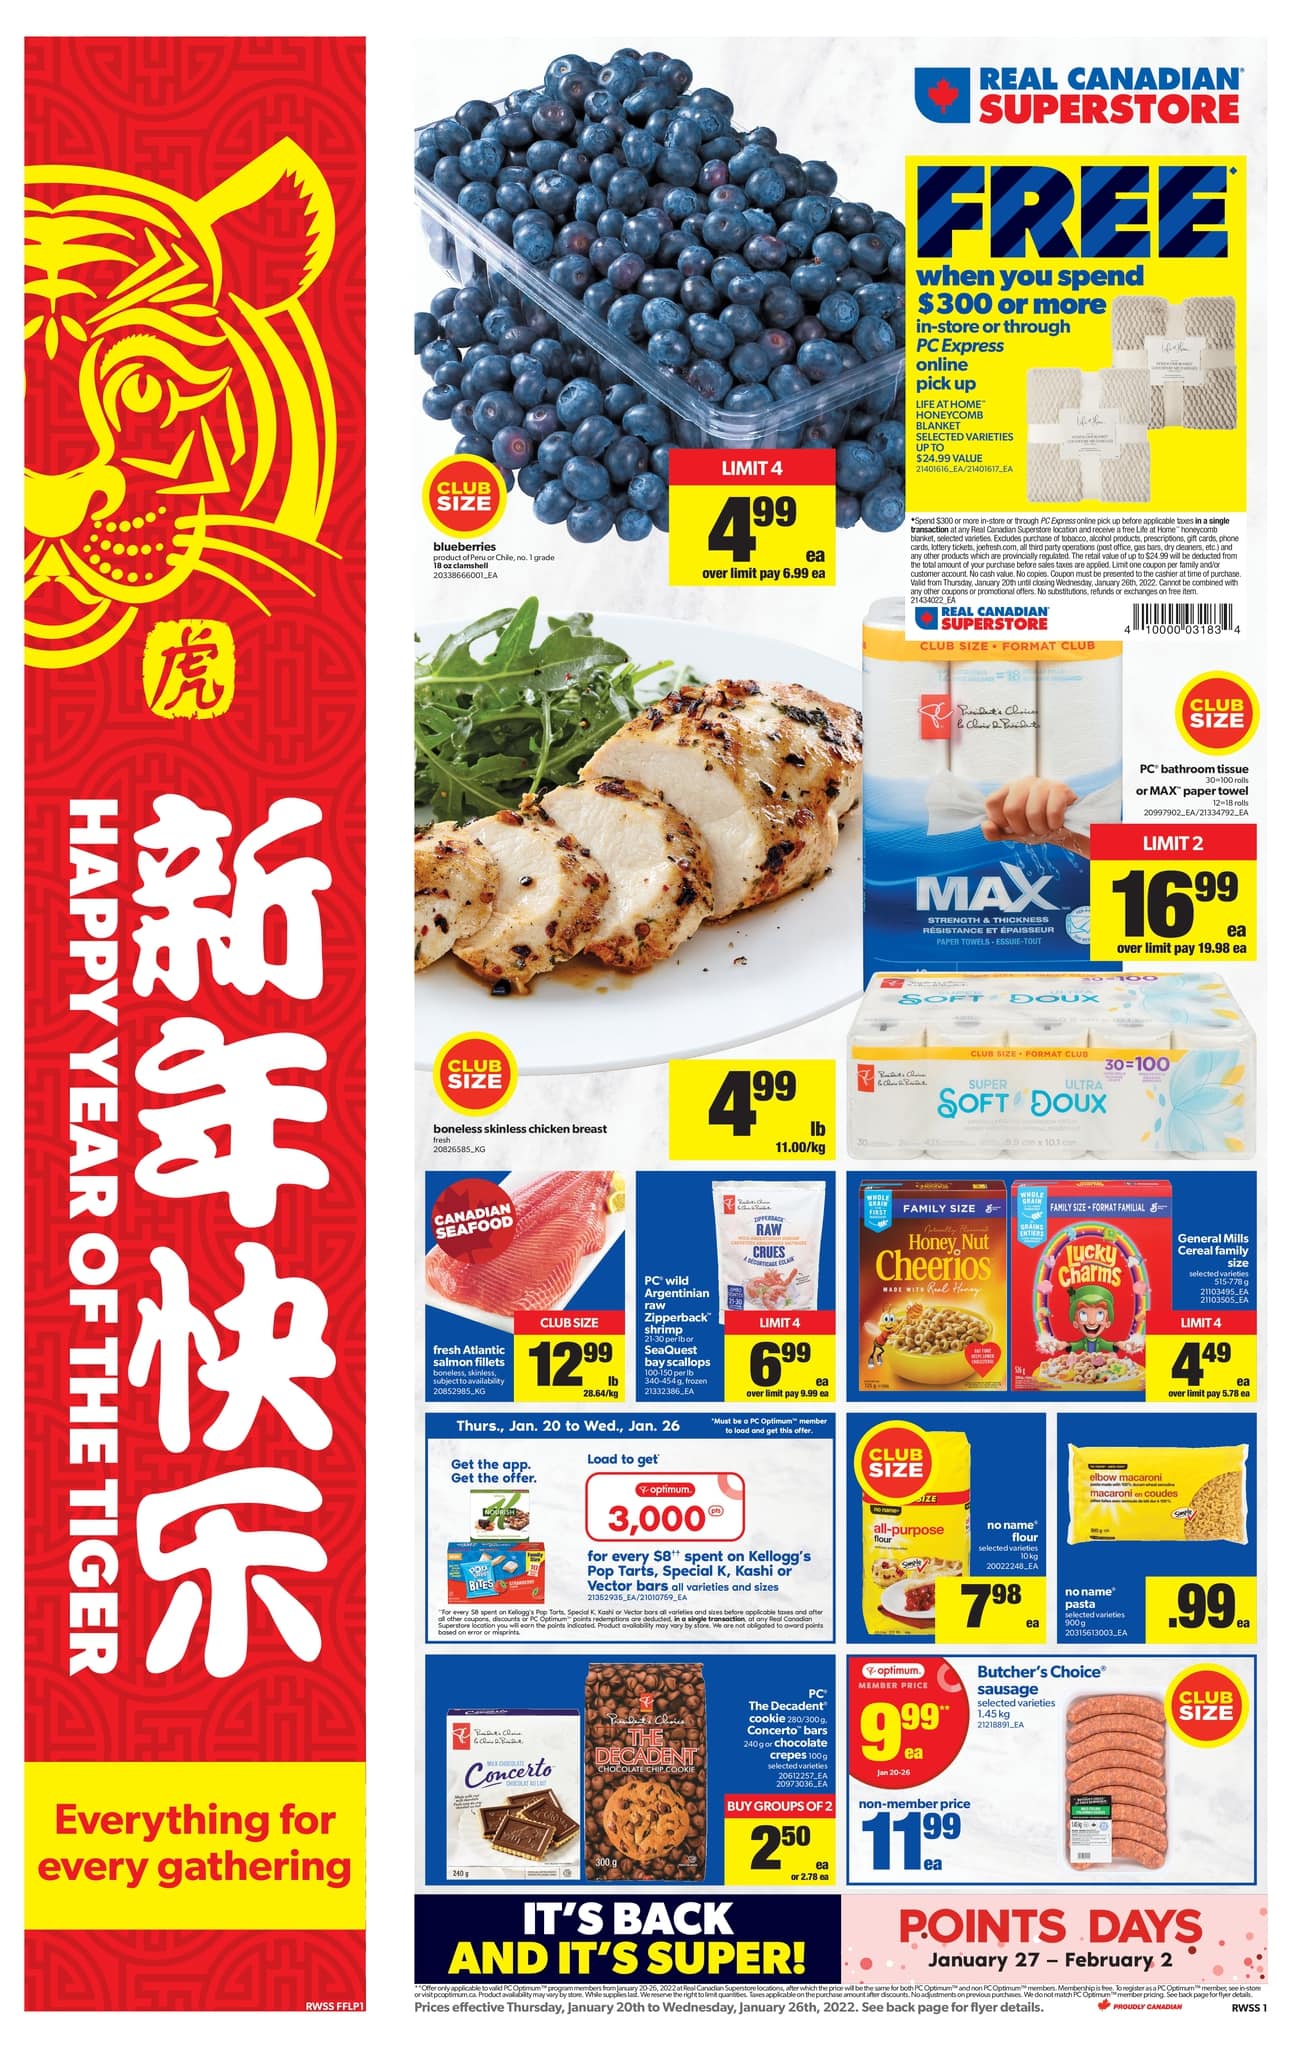 Real Canadian Superstore Western Canada - Weekly Flyer Specials